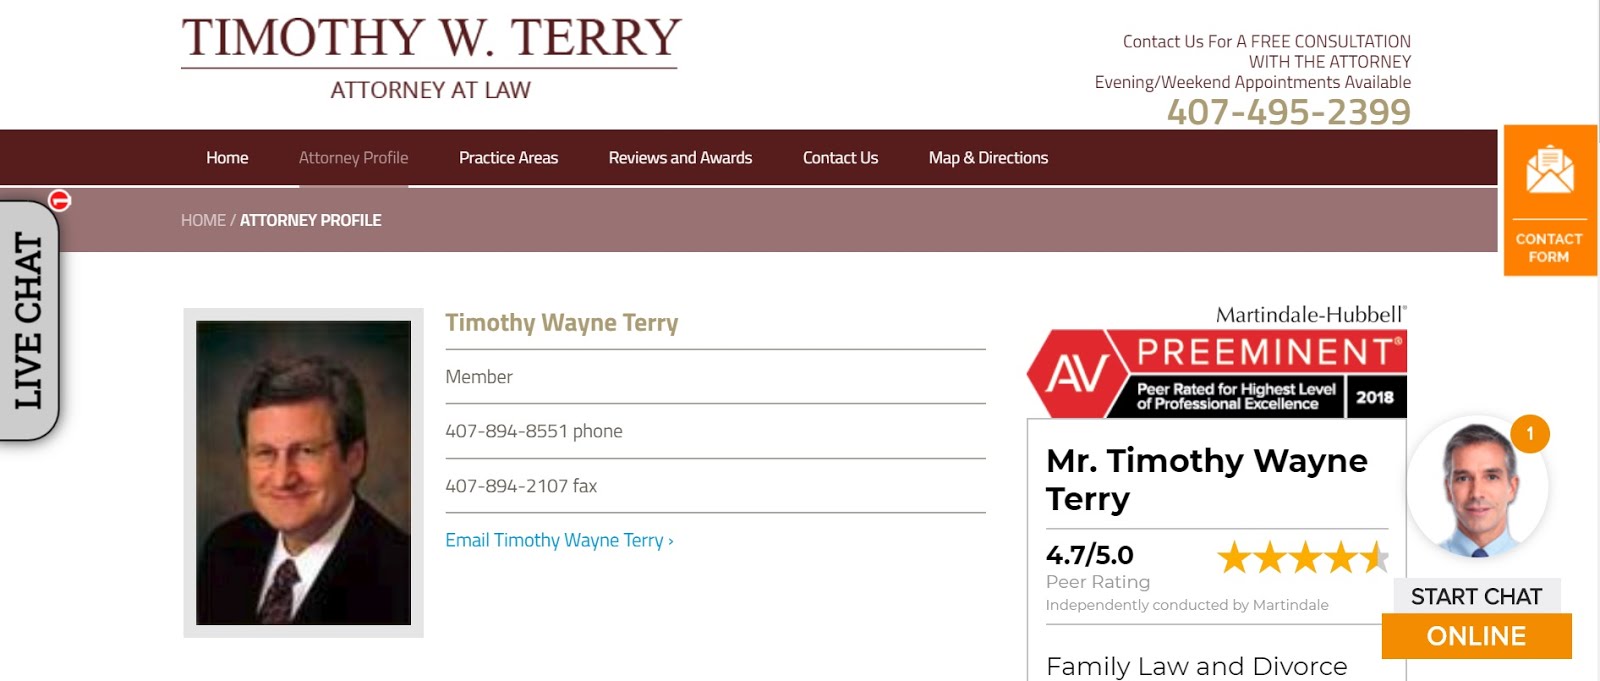 Timothy W. Terry, Attorney in Florida